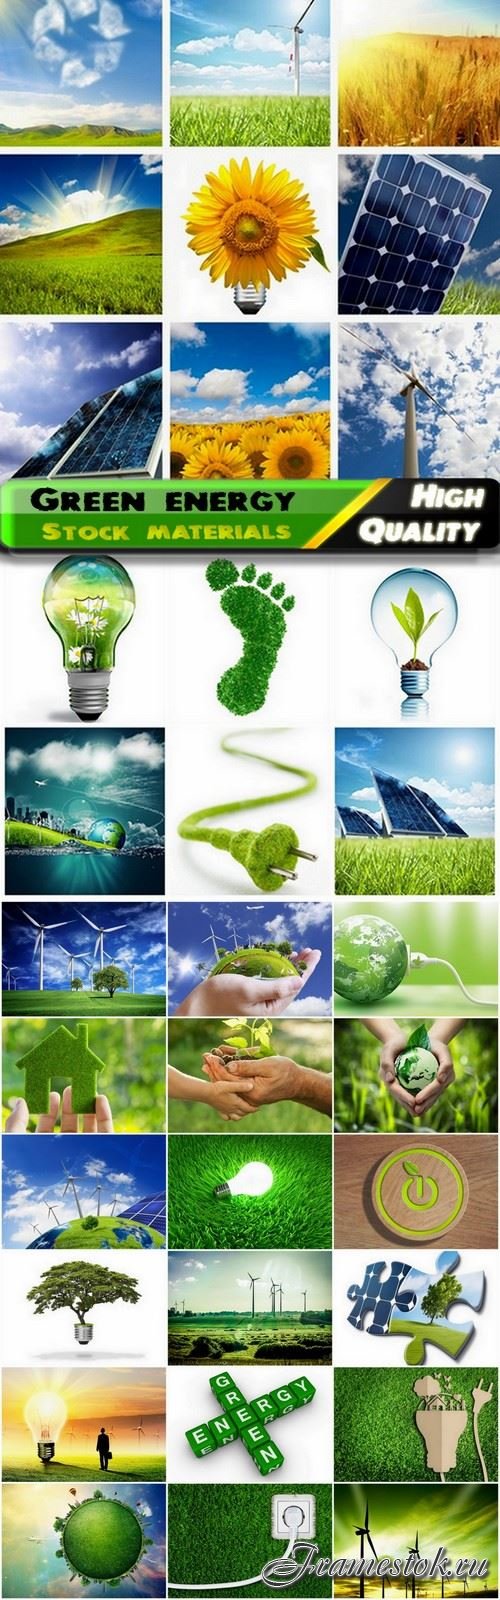 Green energy concept and environment care - 25 Eps